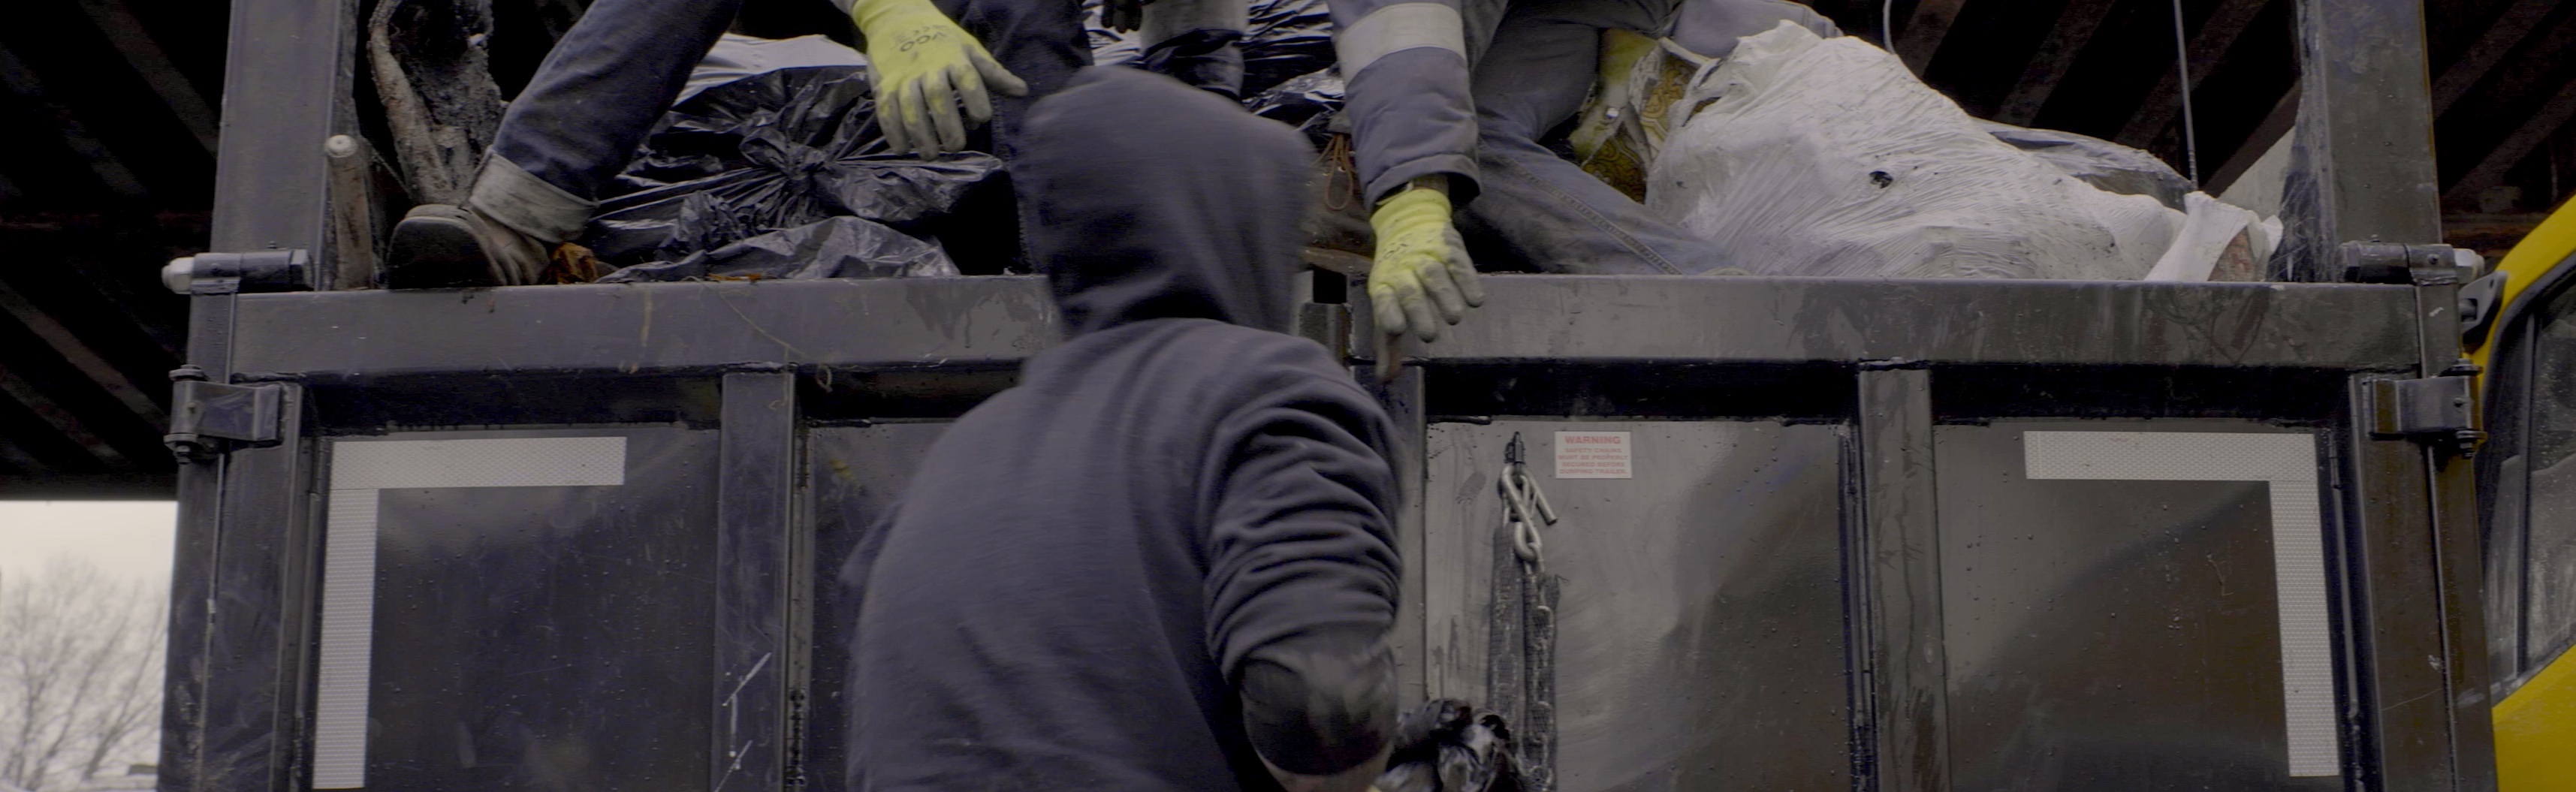 In a film still from Melissa Langer's film, "In Excess," a dark photo shows partial views of two men — one with his back to you and wearing a dark hoodie, and the other seen only with a foot and part of a leg showing and hands in yellow worker gloves either reaching down to receive something from the hooded man or to give them something. They are working with what looks like trash in a dumpster. 